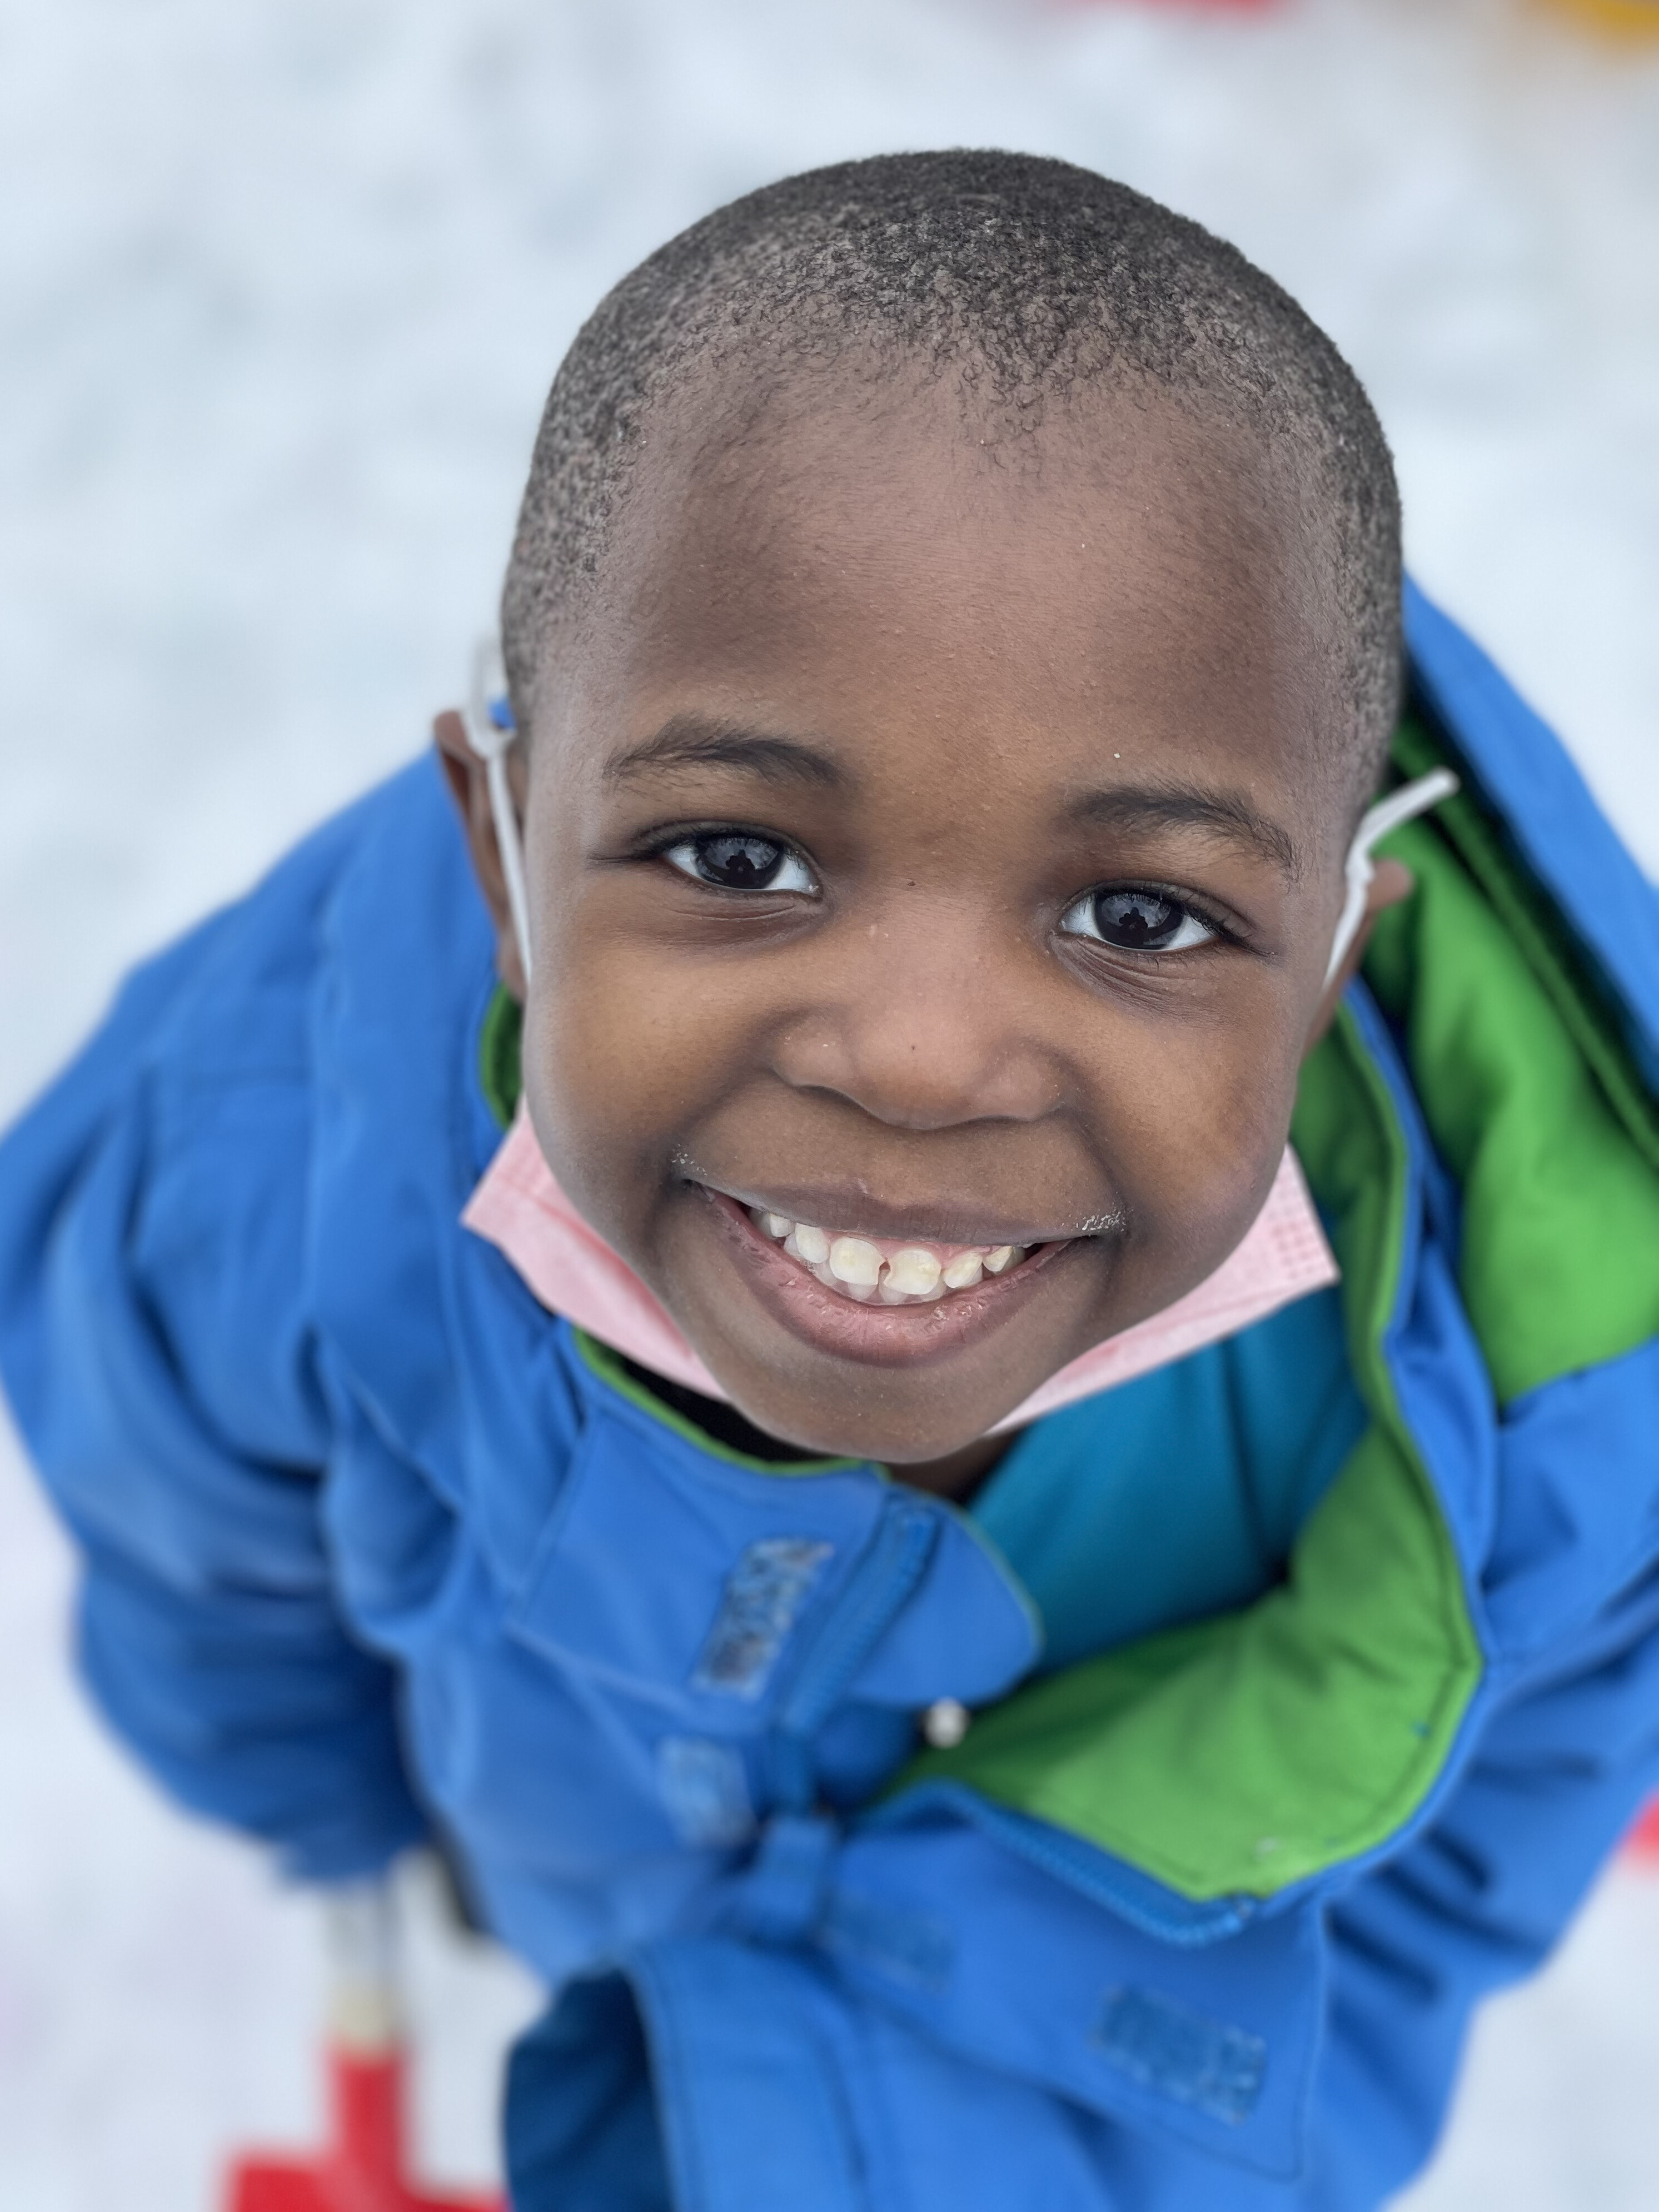 Photograph of a young black boy outside in Vermont smiling up towards the camera. The boy has short hair and is wearing a blue snow suit outside with snow around him.